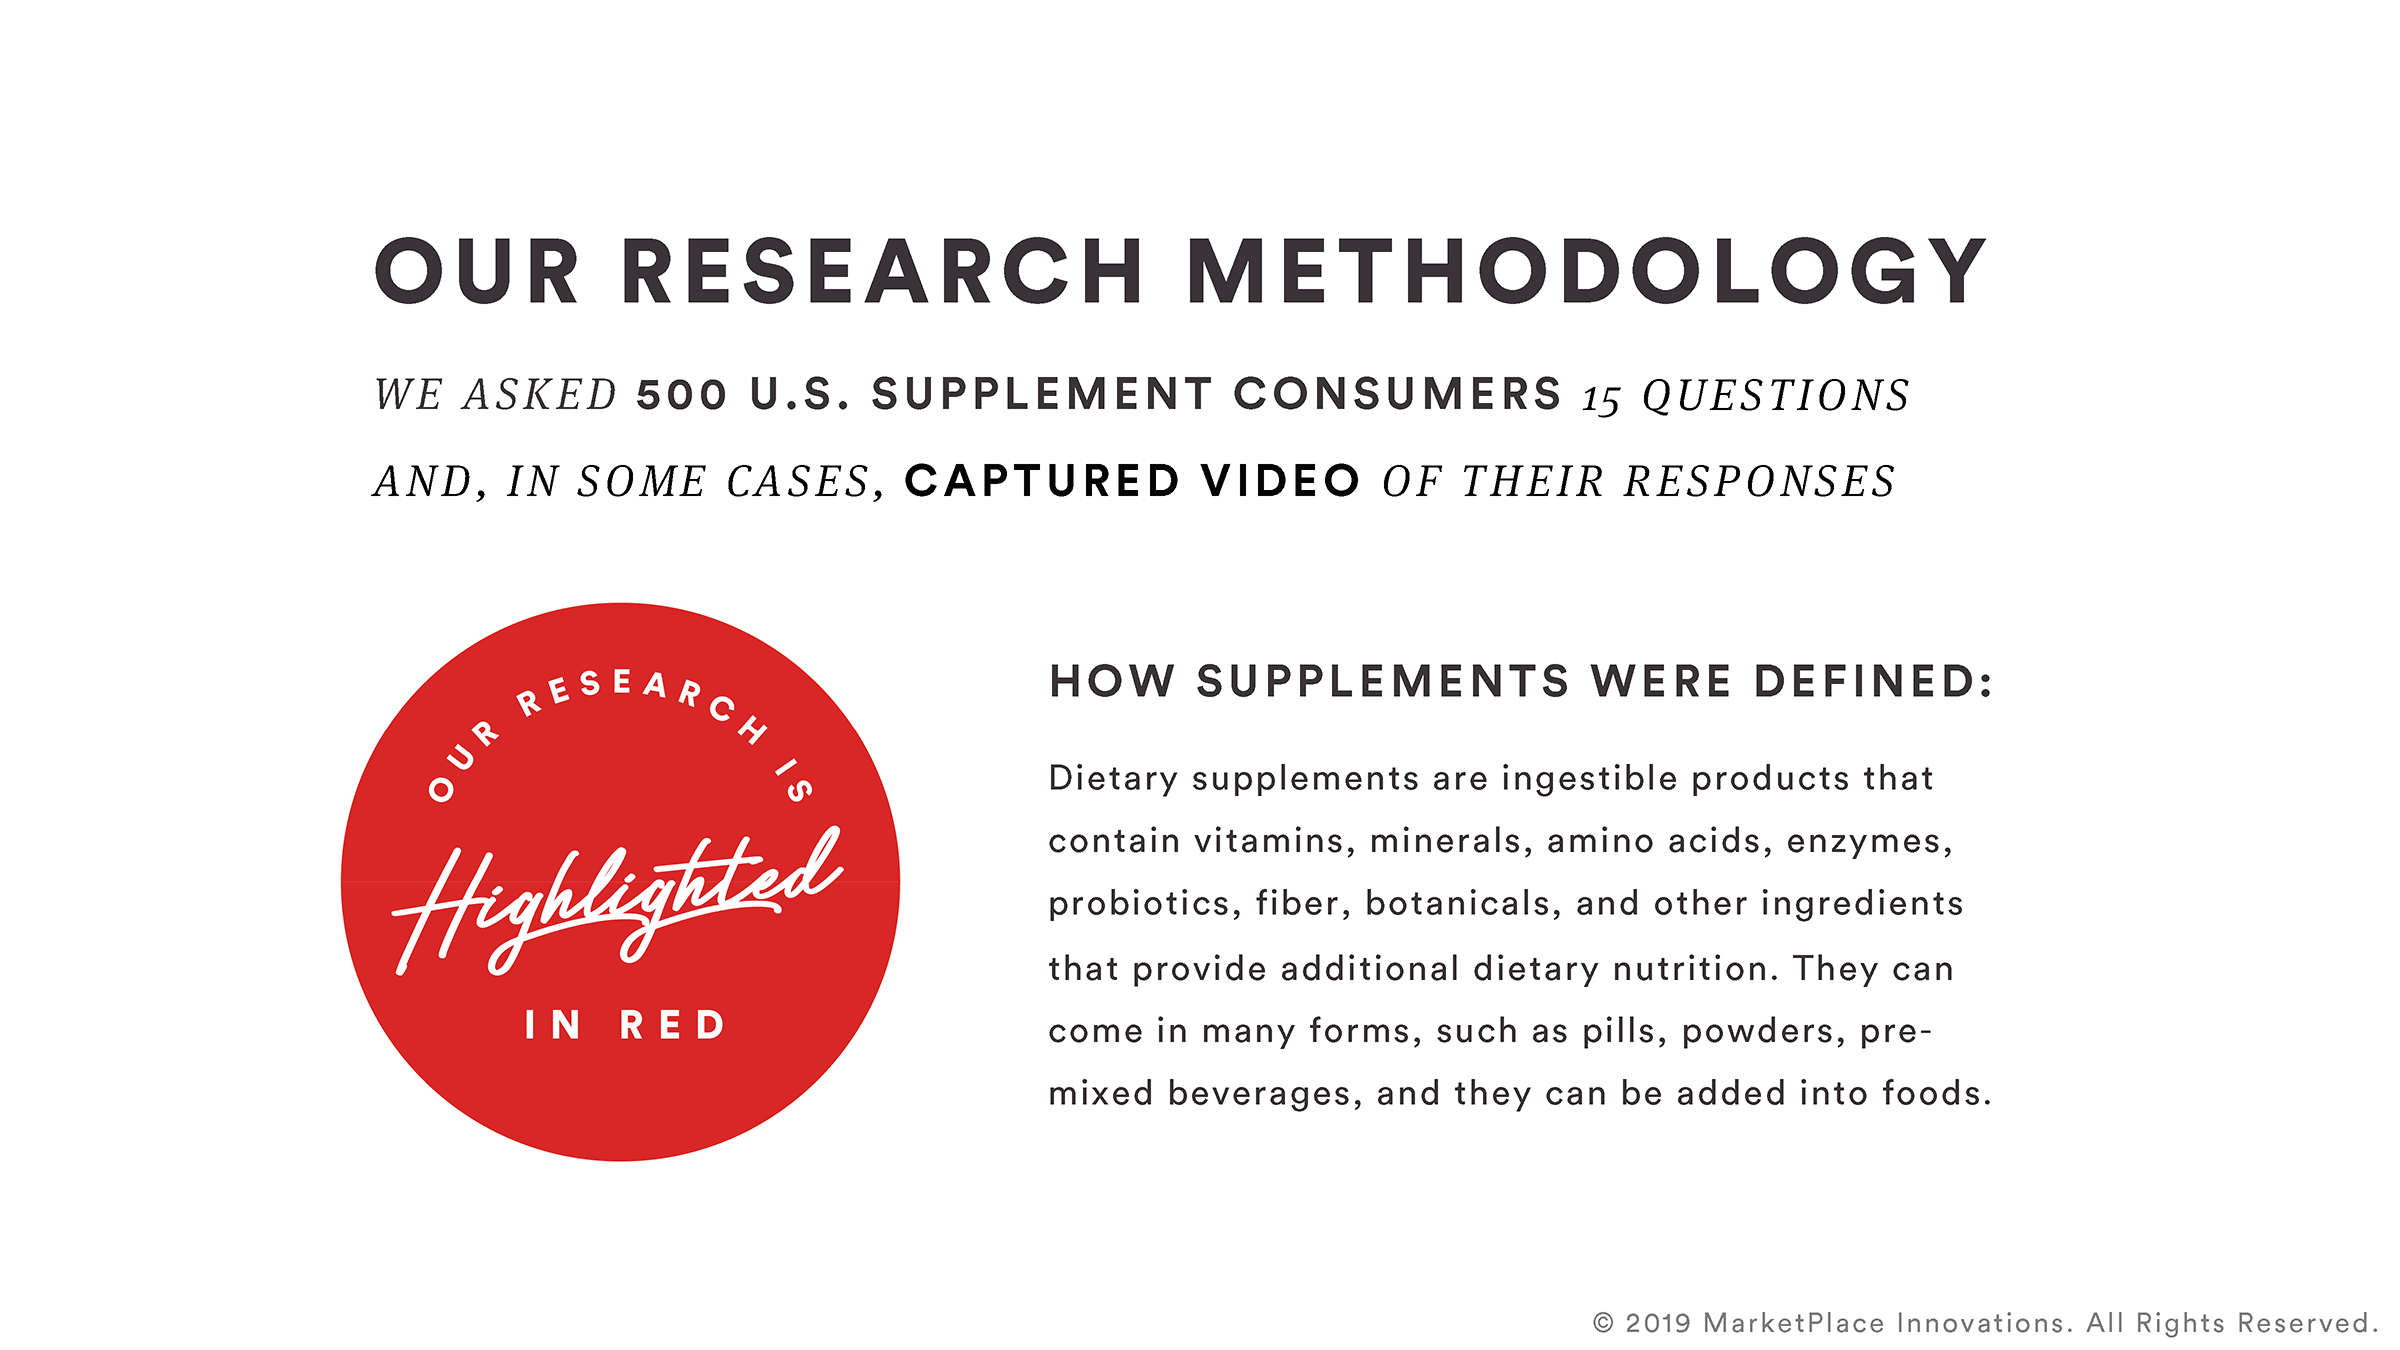 slide explaining our research methodology for this study